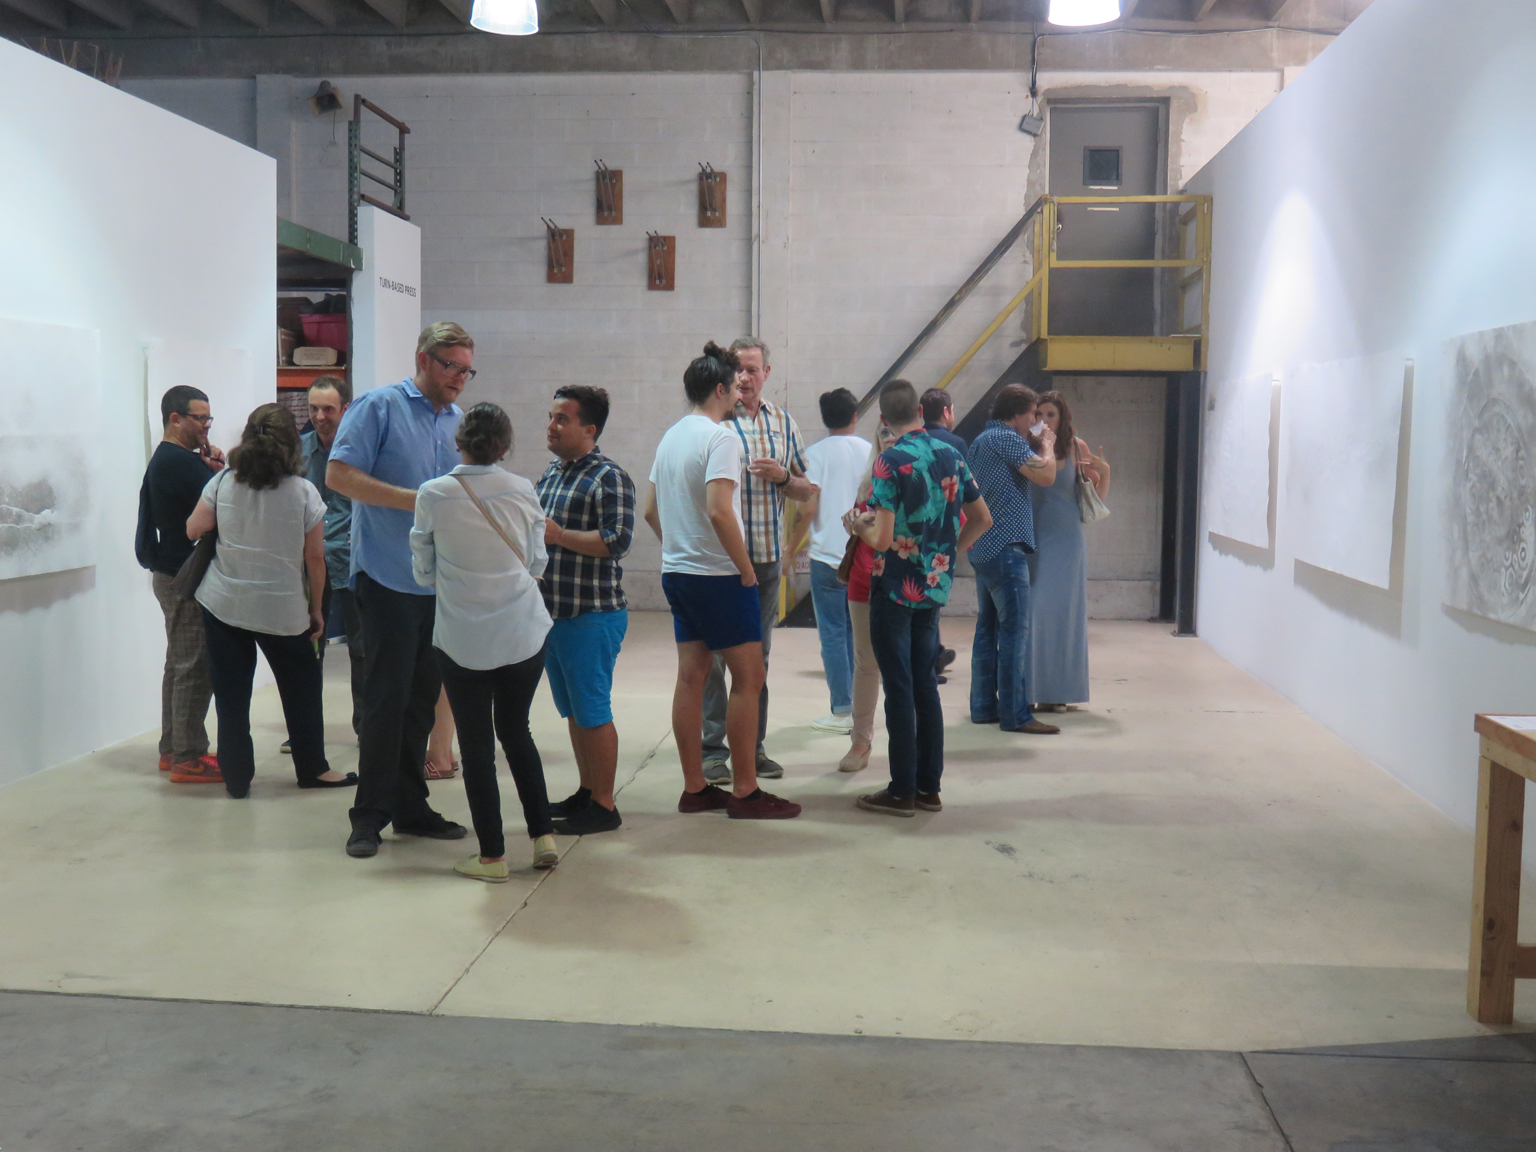 Opening night photo from Paper Pavement by Nick Gilmore at Turn-Based Press.